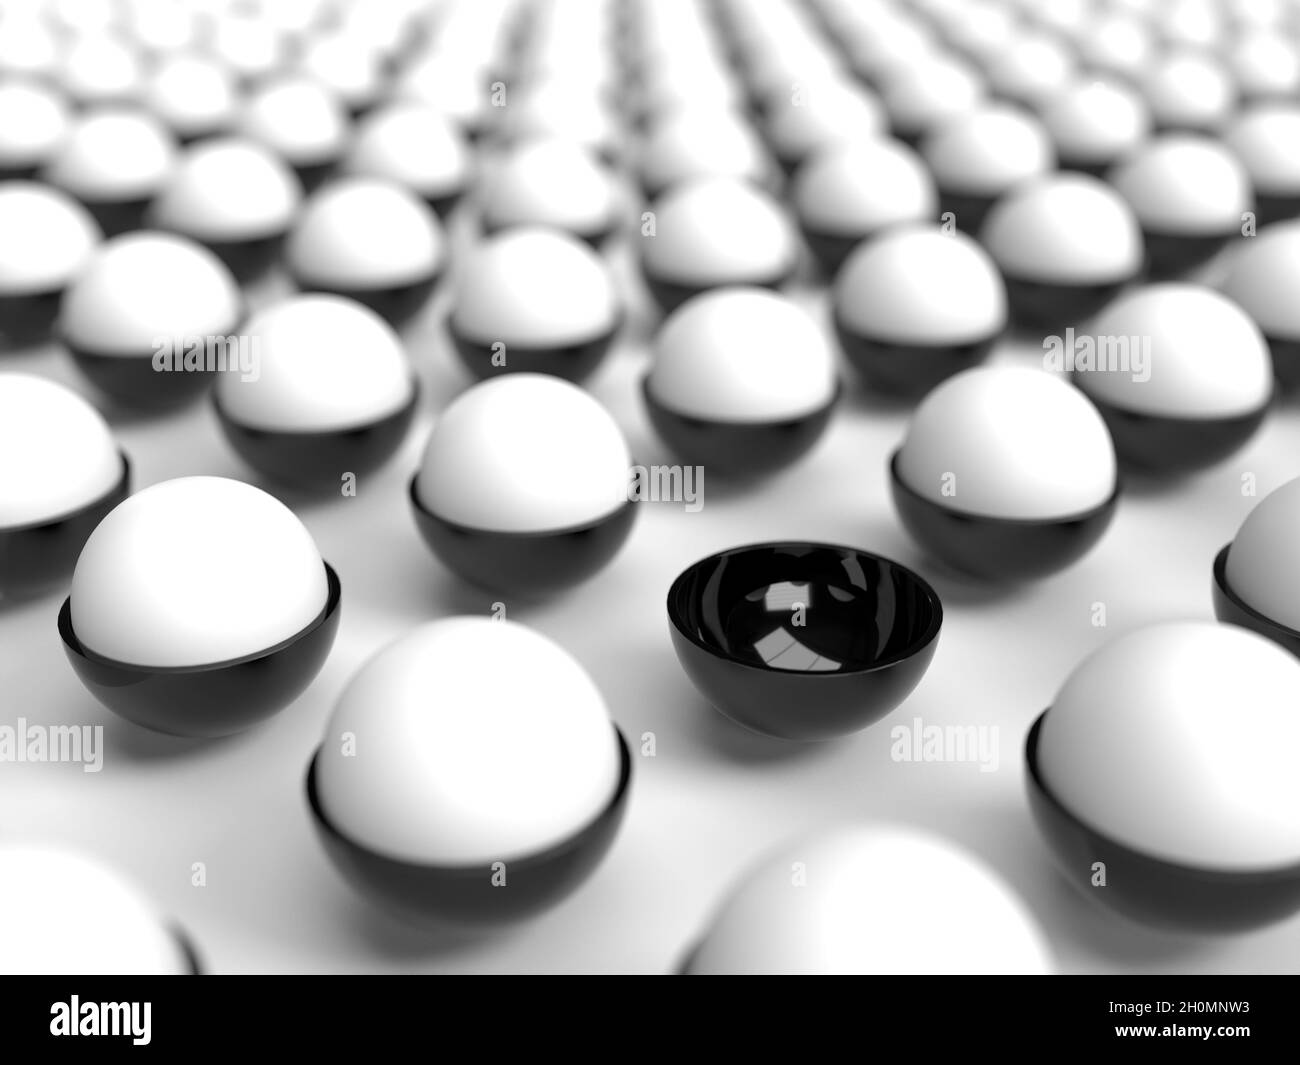 A missing ball in a field of white balls Stock Photo